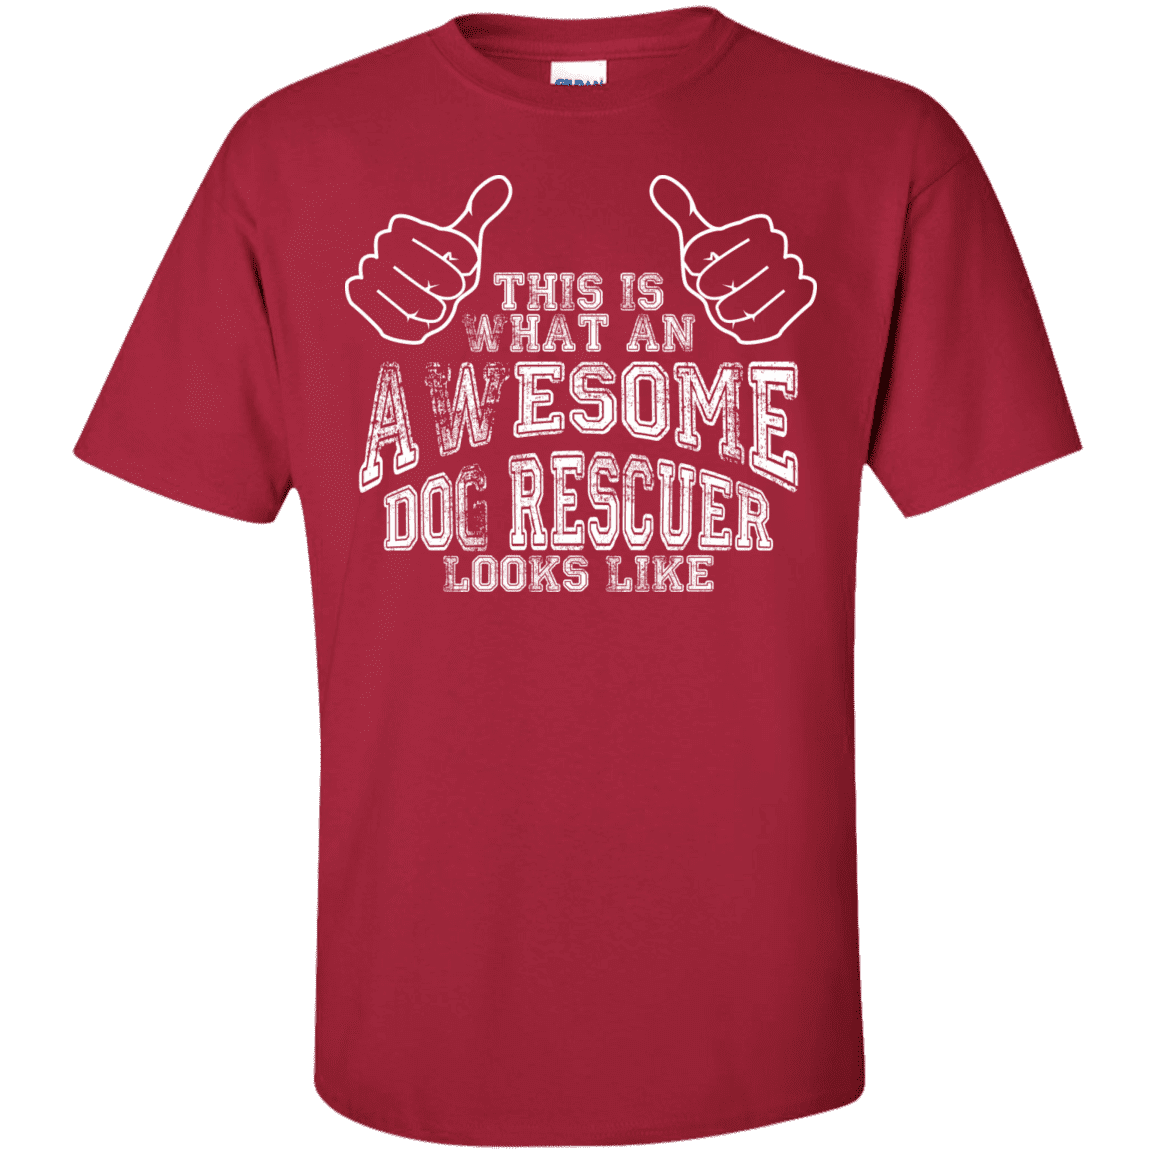 Awesome Dog Rescuer - T Shirt.